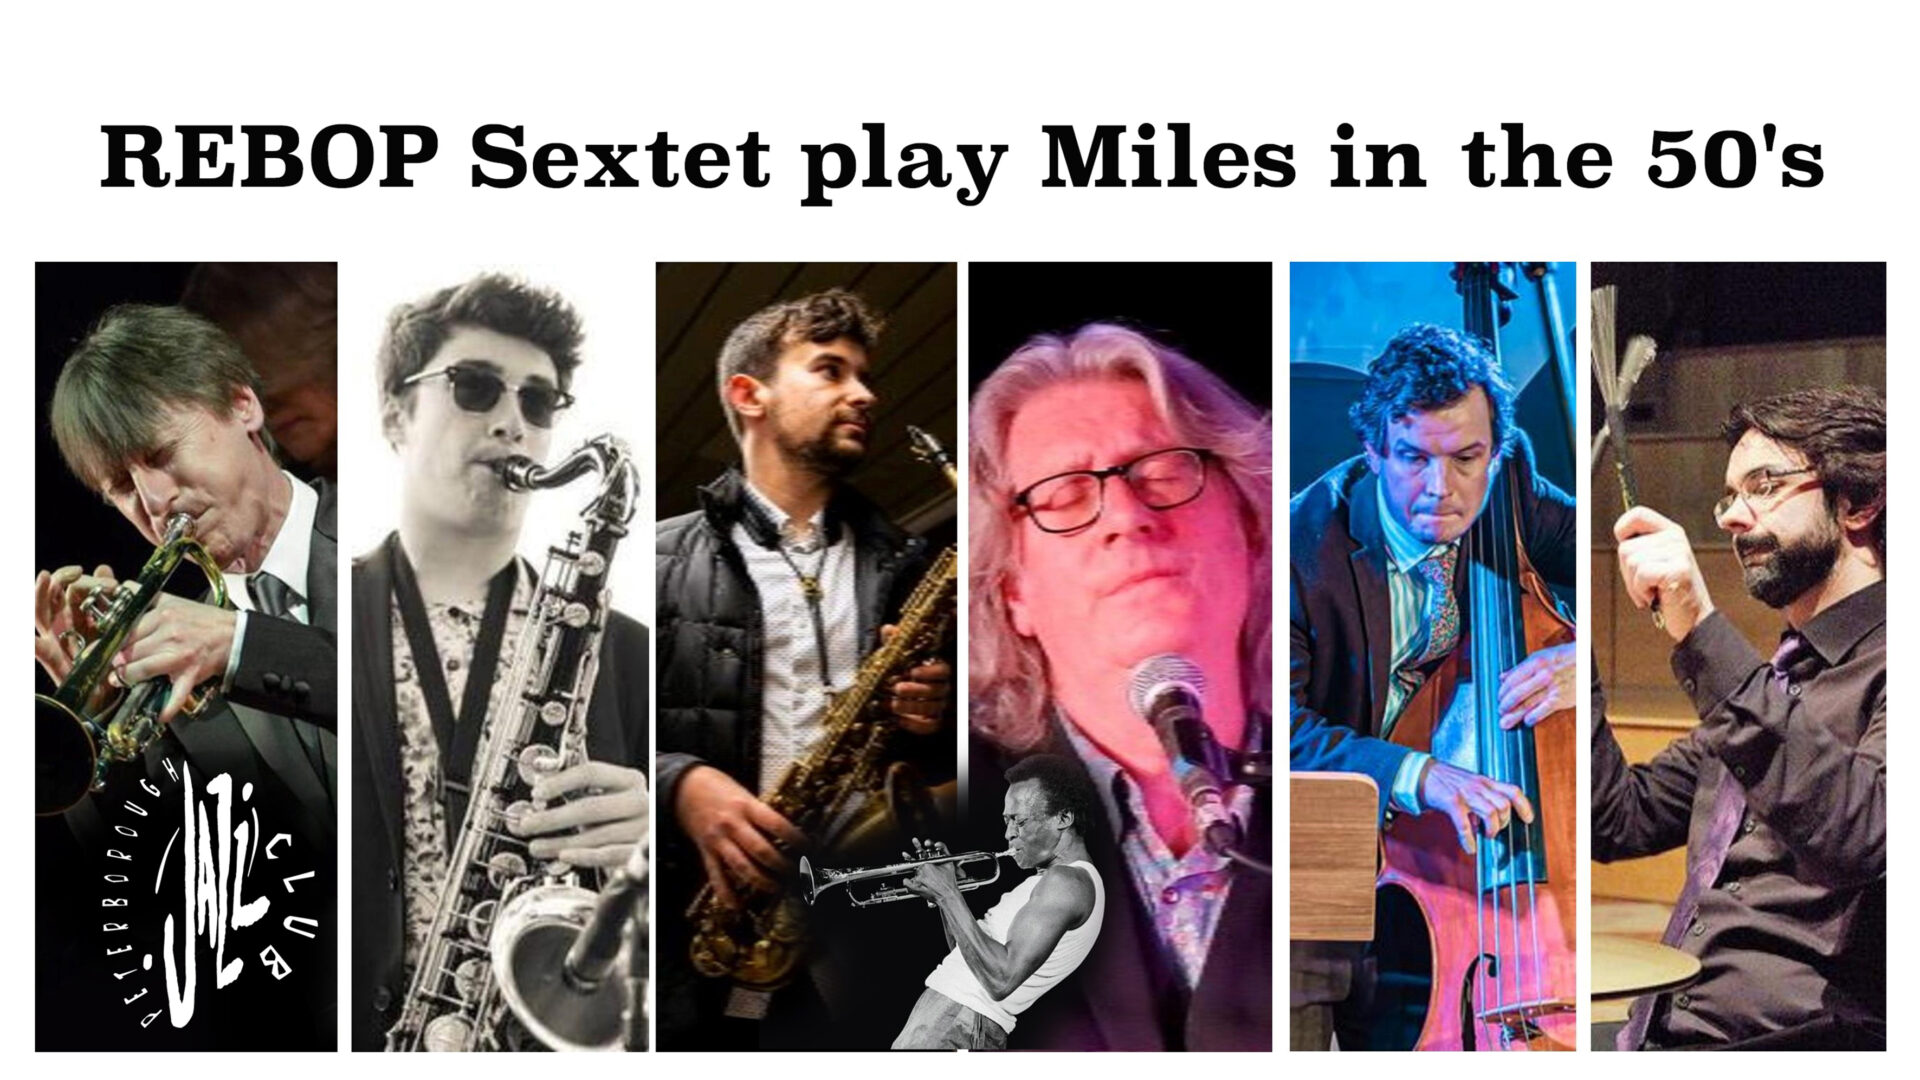 1 - REBOP Sextet play Miles in the 50's_2